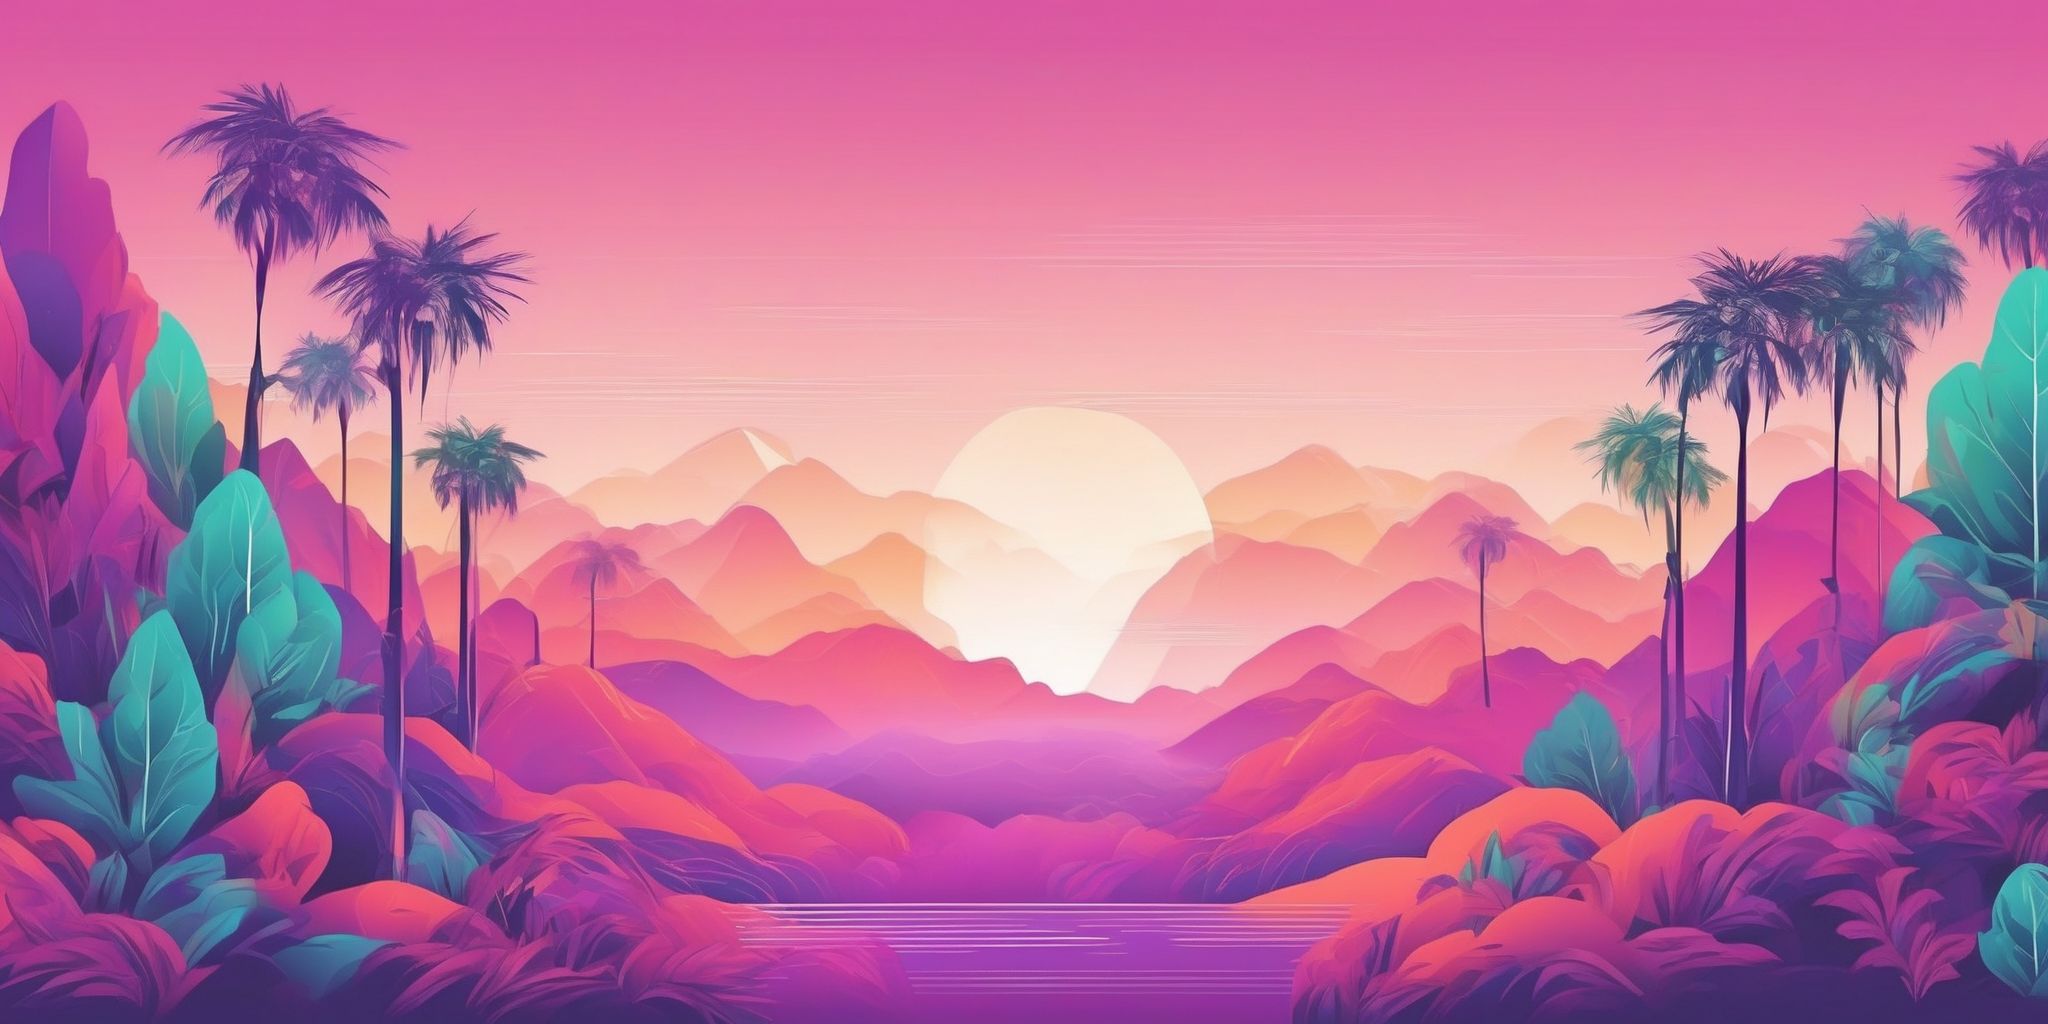 Views in illustration style with gradients and white background